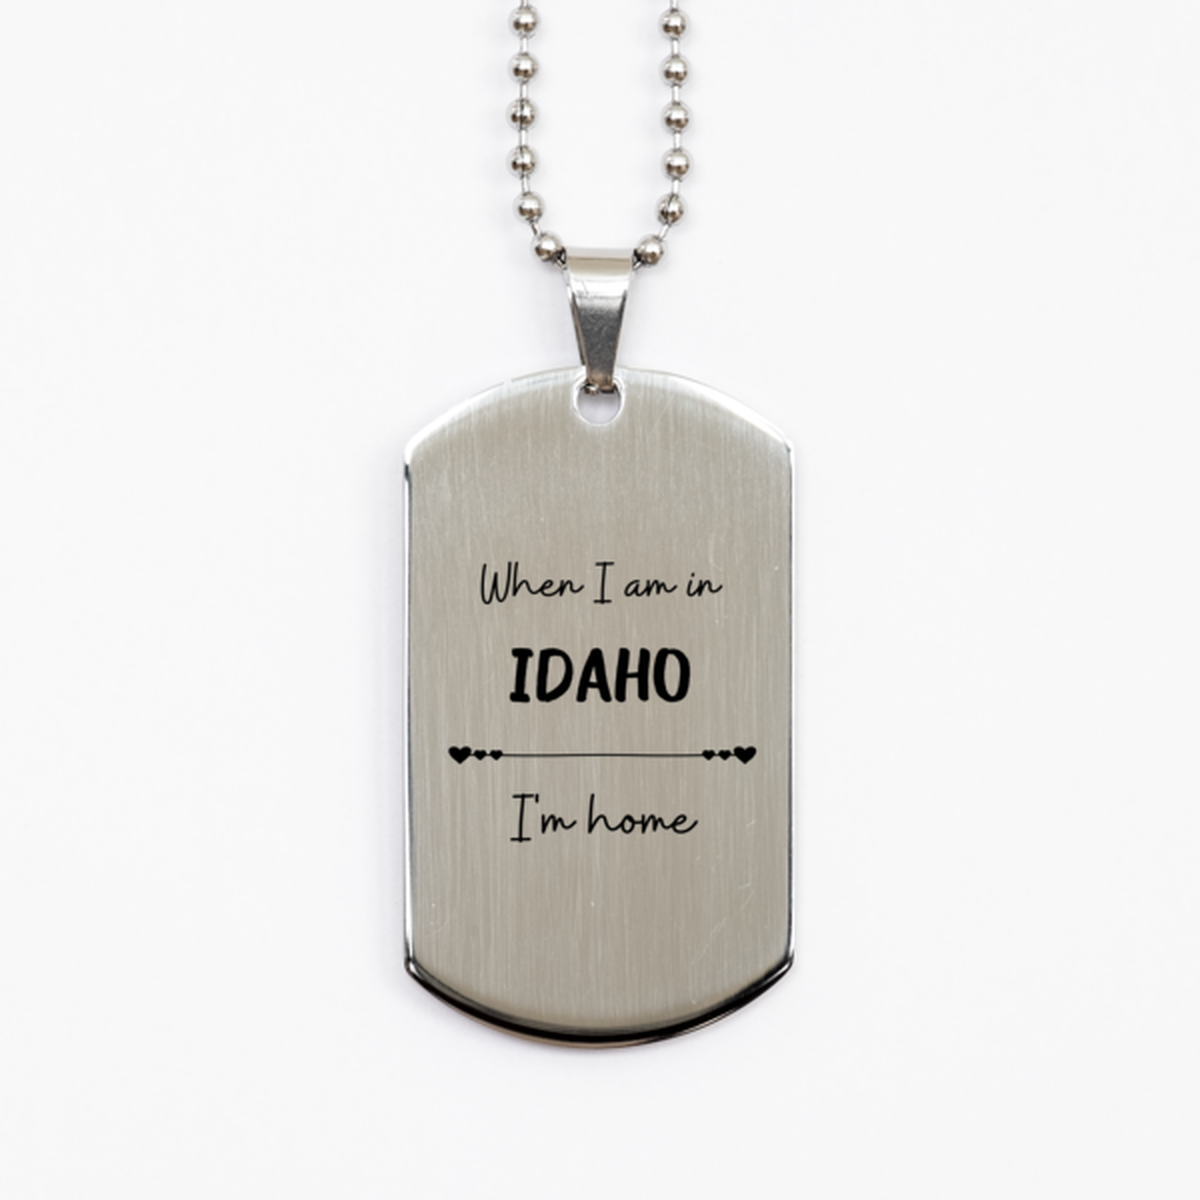 When I am in Idaho I'm home Silver Dog Tag, Cheap Gifts For Idaho, State Idaho Birthday Gifts for Friends Coworker